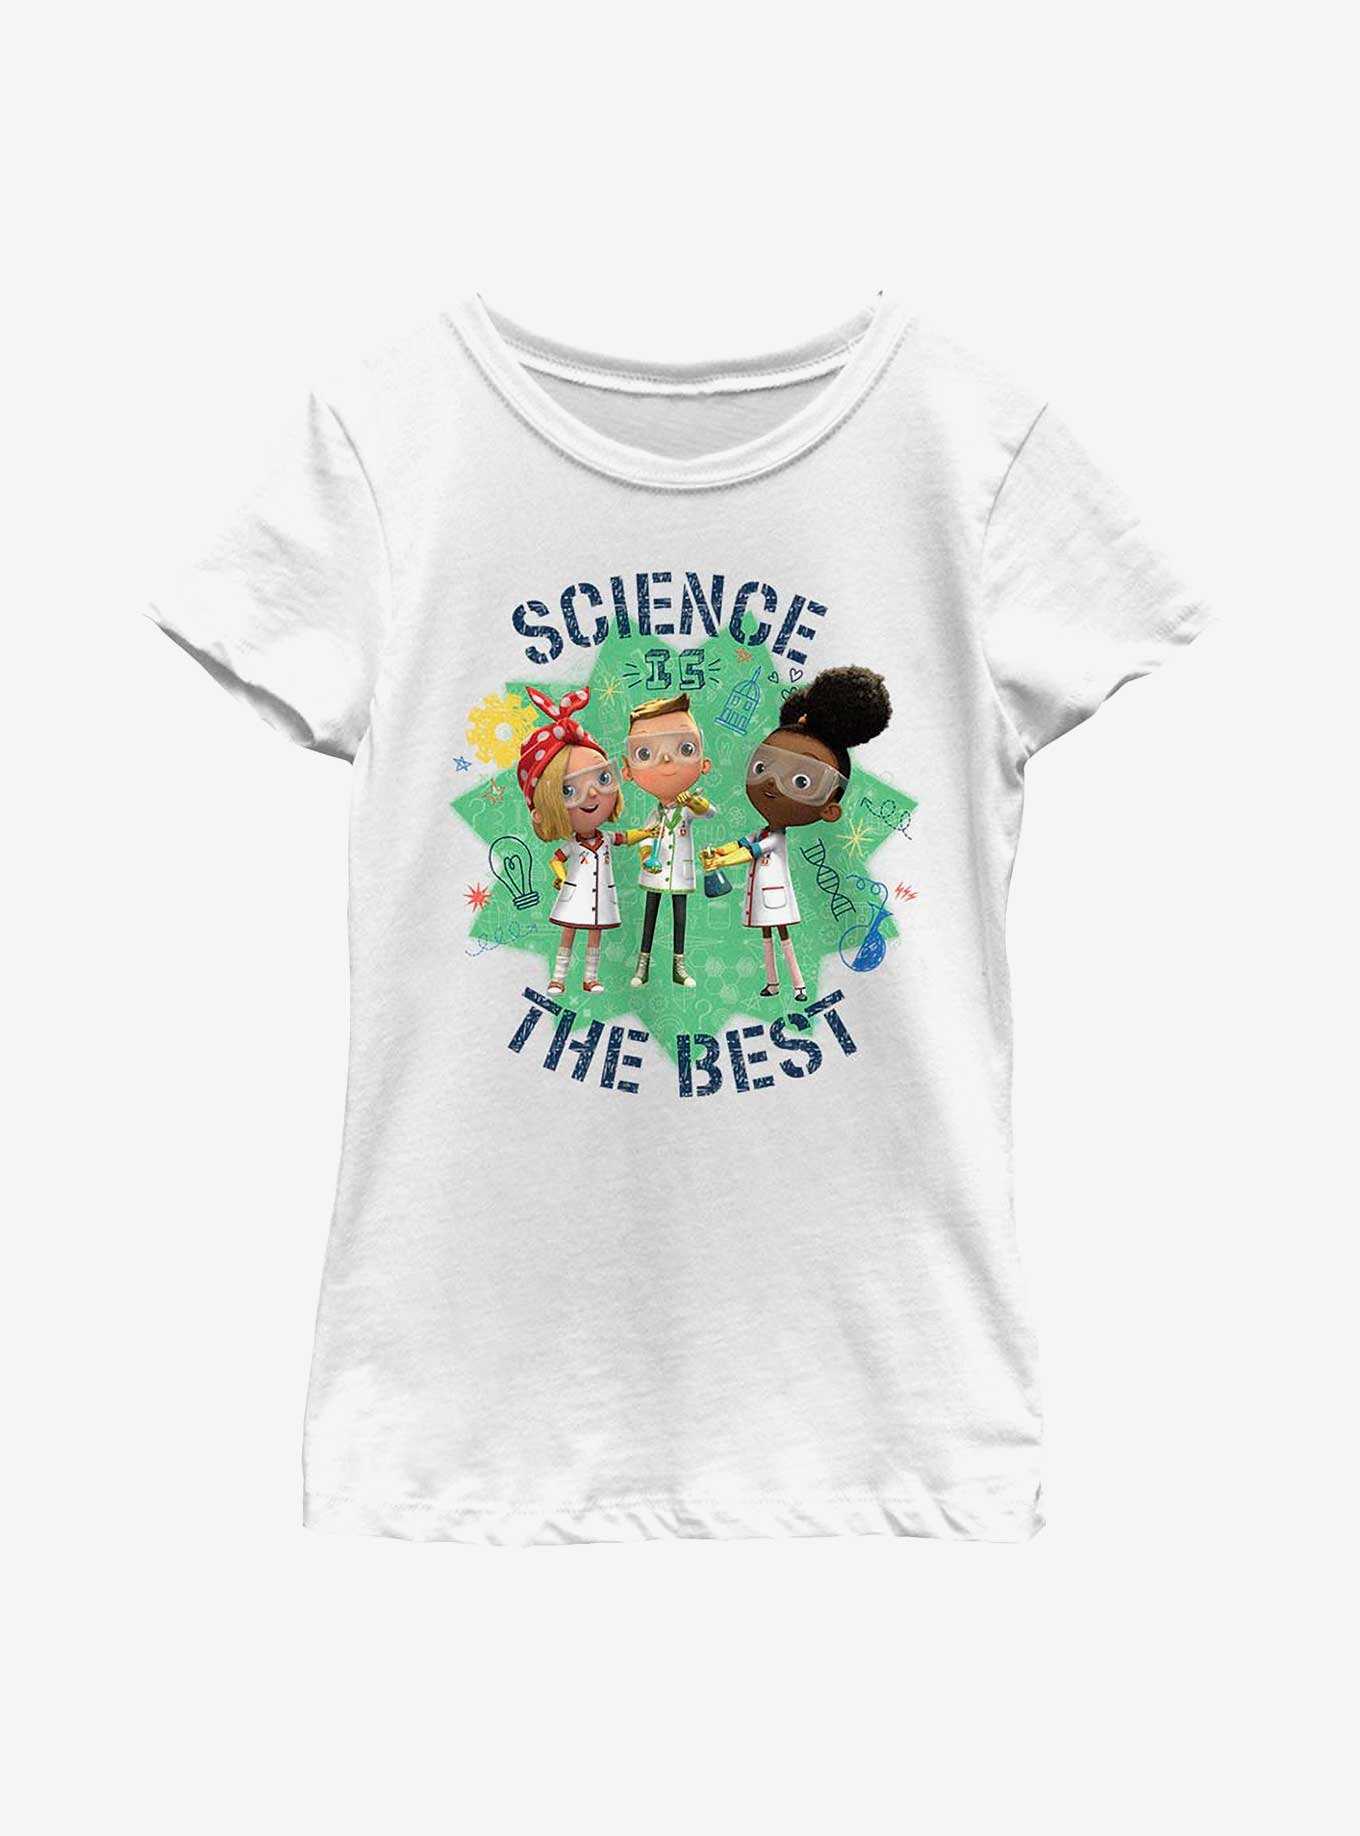 Ada Twist, Scientist Science Is The Best Youth Girls T-Shirt, , hi-res